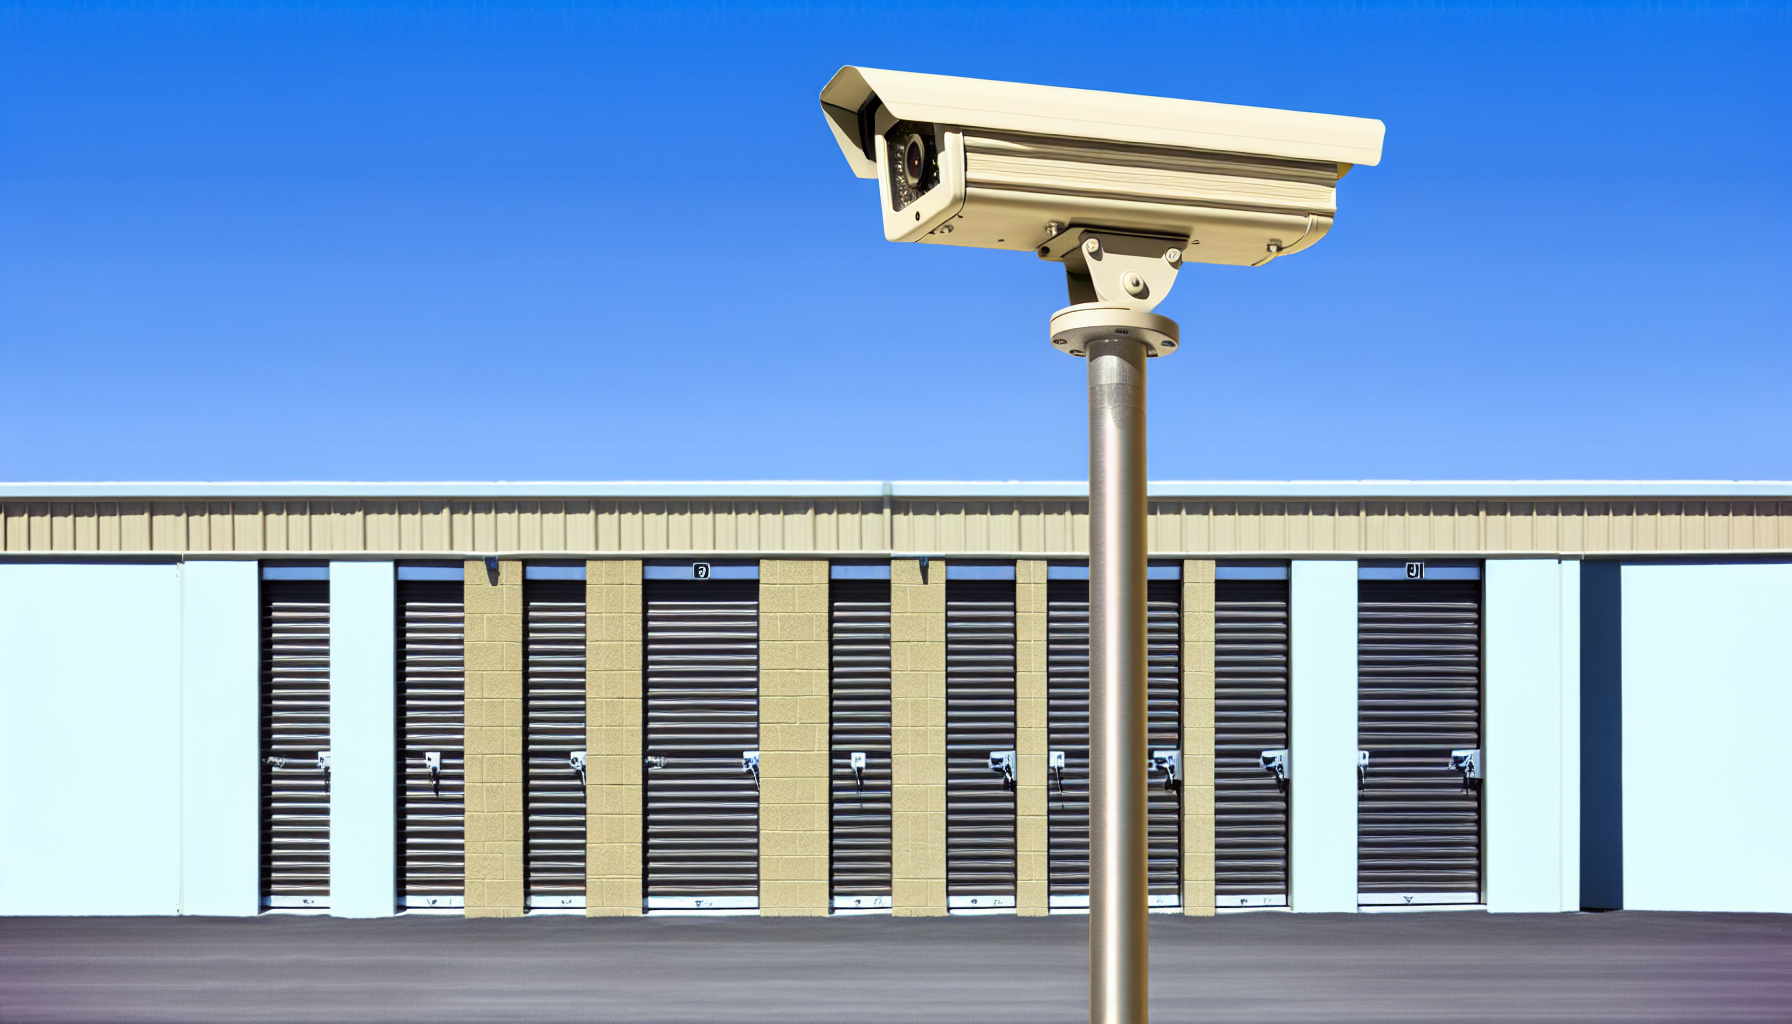 Security camera overlooking a row of self storage units